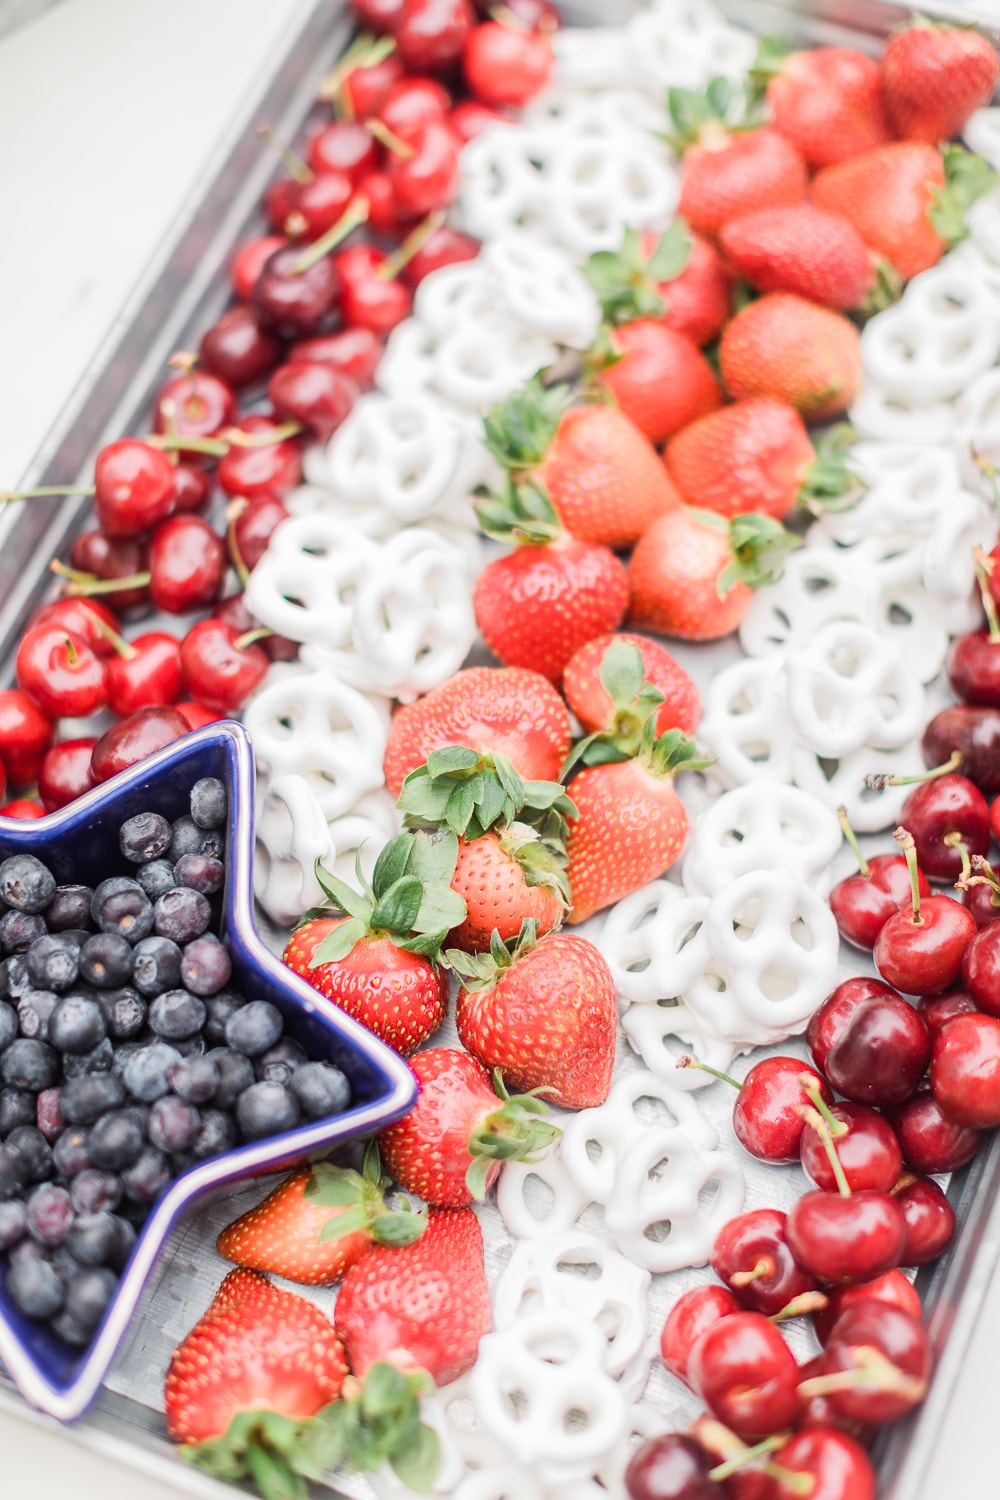 Patriotic Memorial Day fruit platter idea created by blogger Stephanie Ziajka on Diary of a Debutante